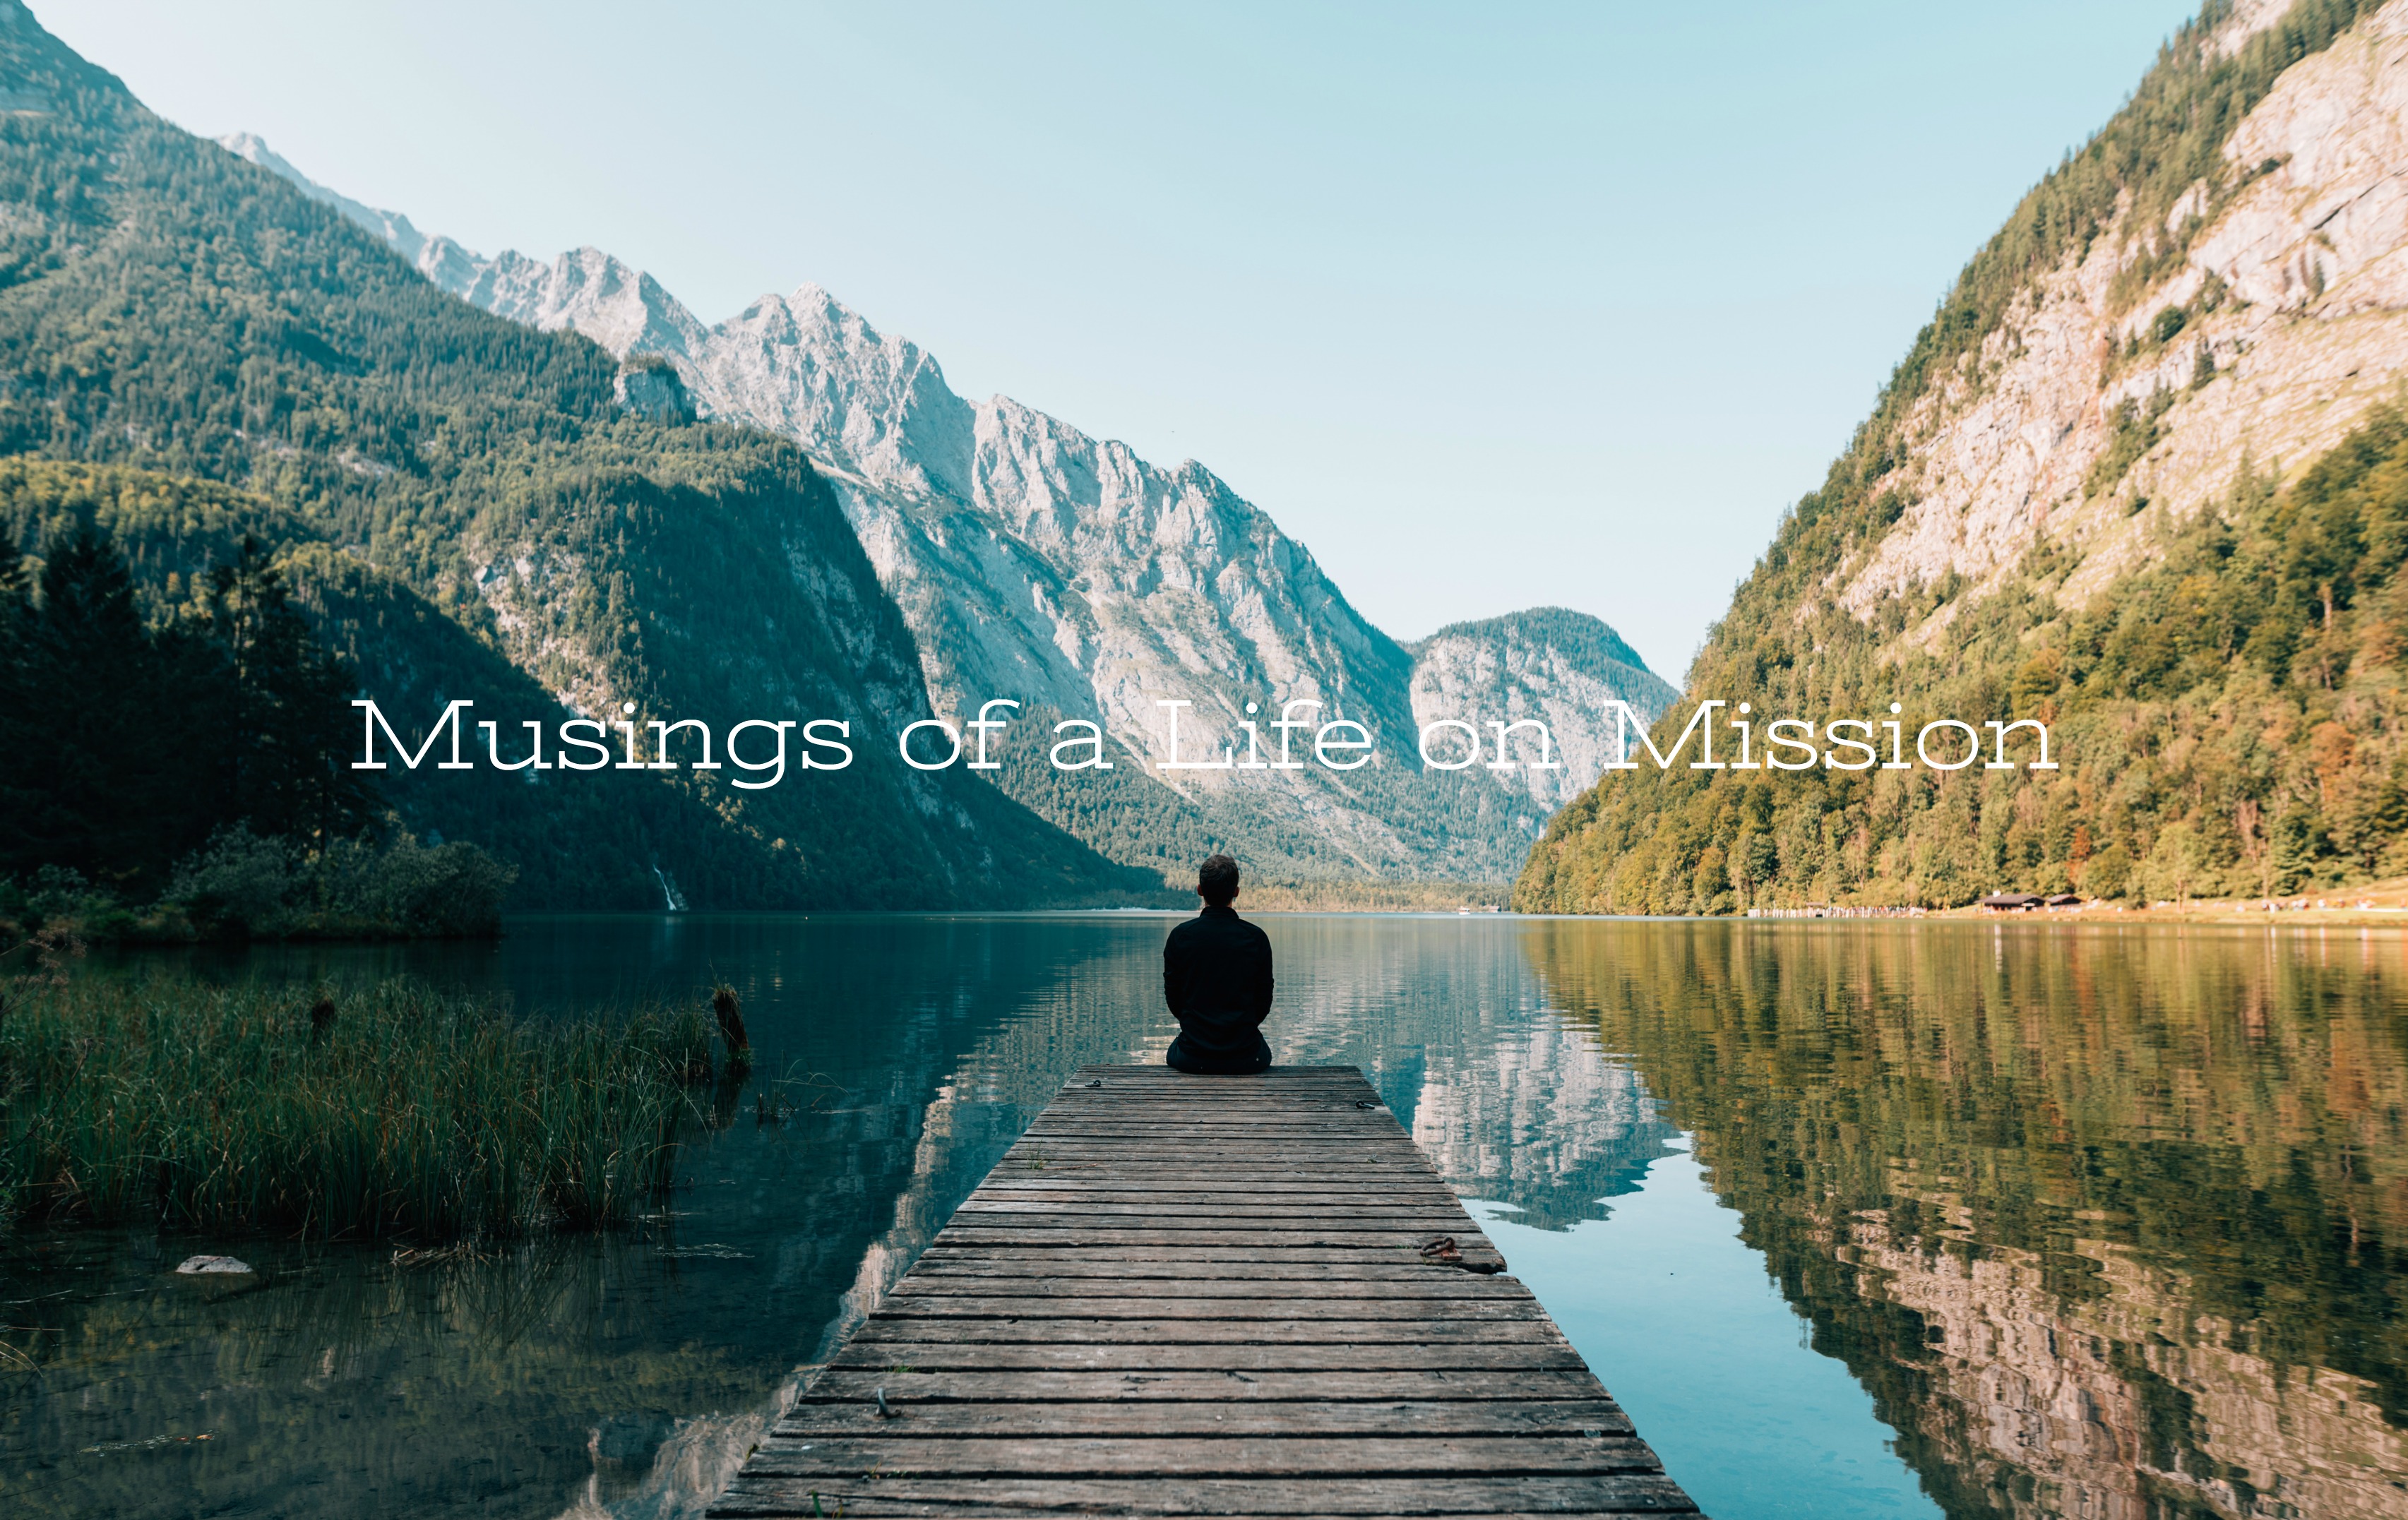 Musings of a Life on Mission